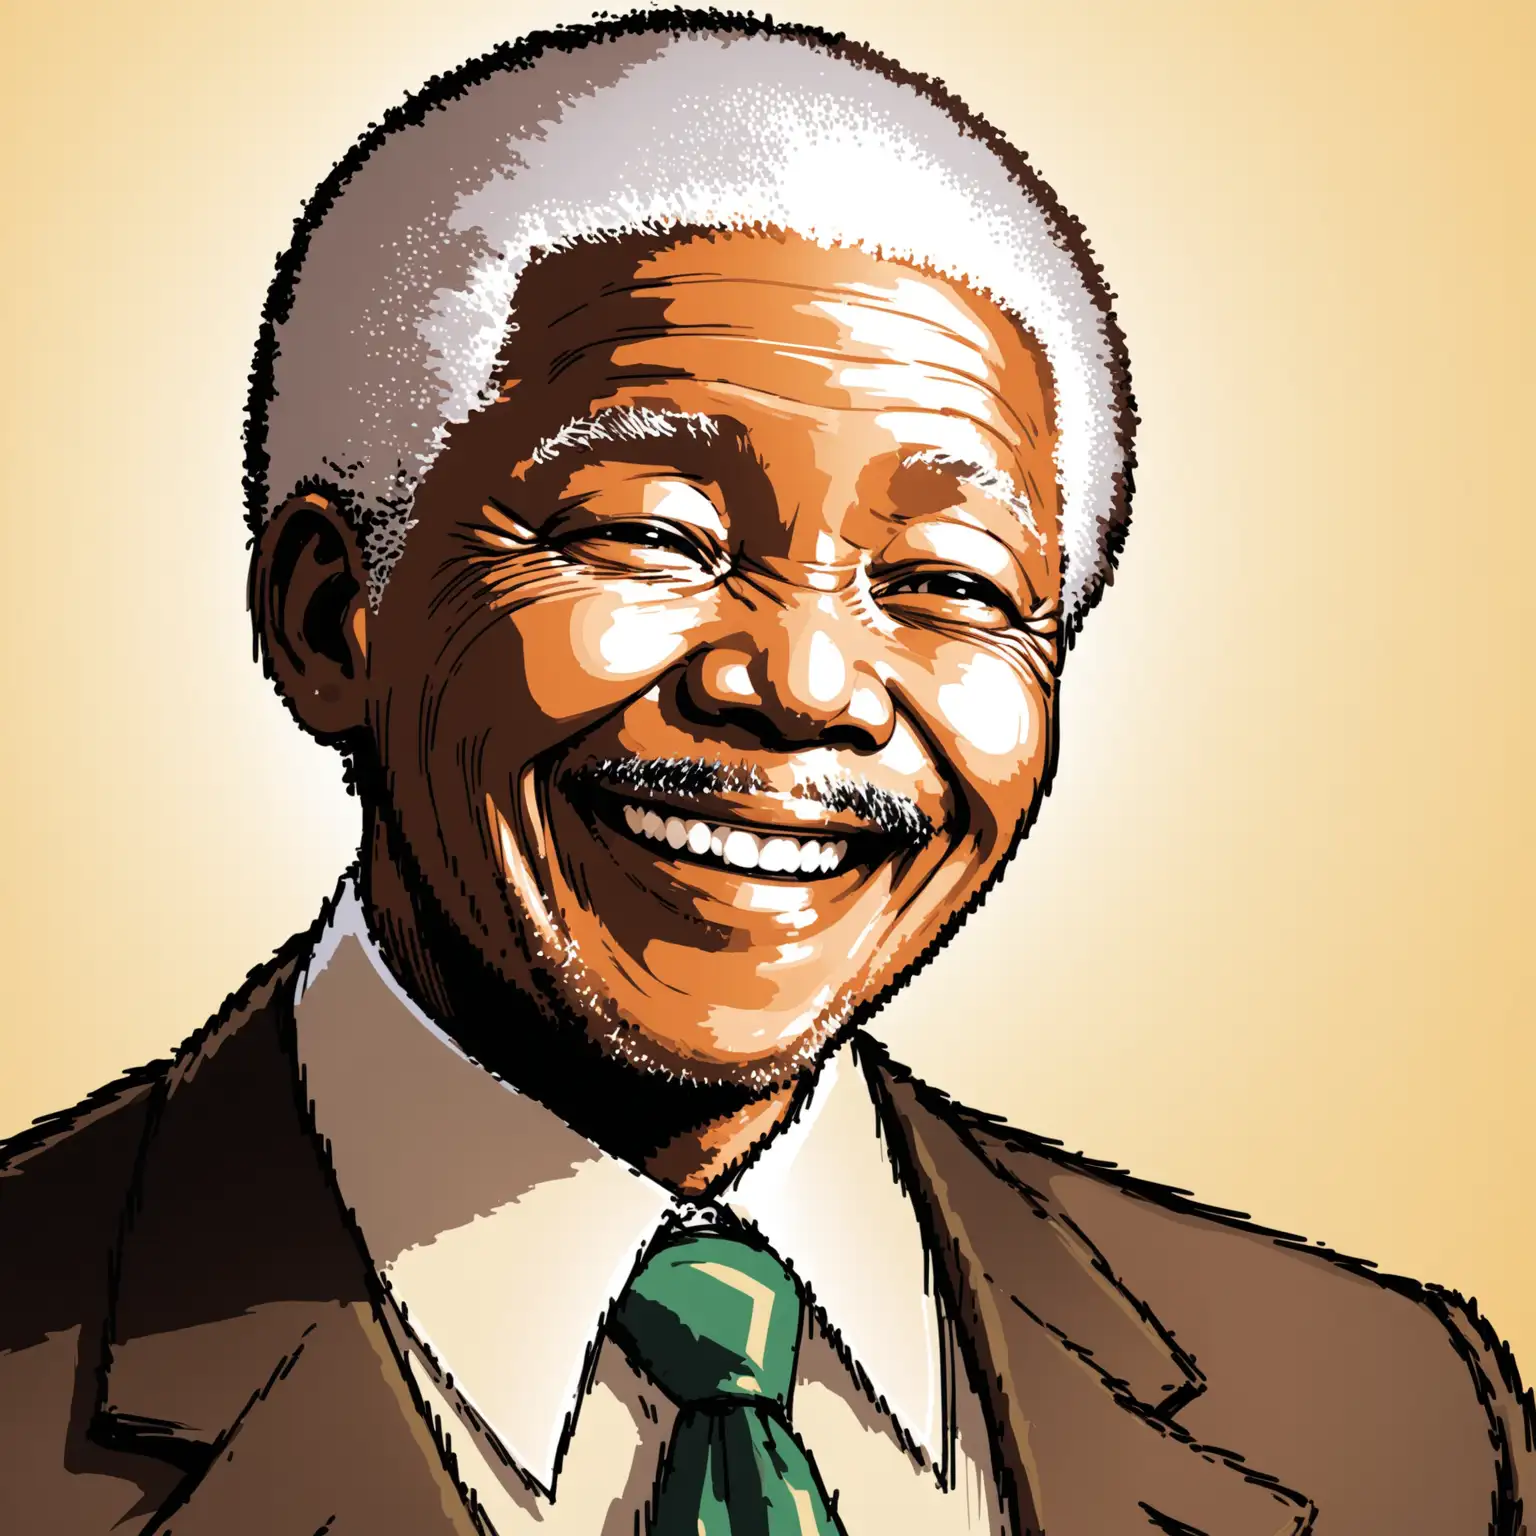 Illustrate an image of nelson mandela smiling, looking forward.